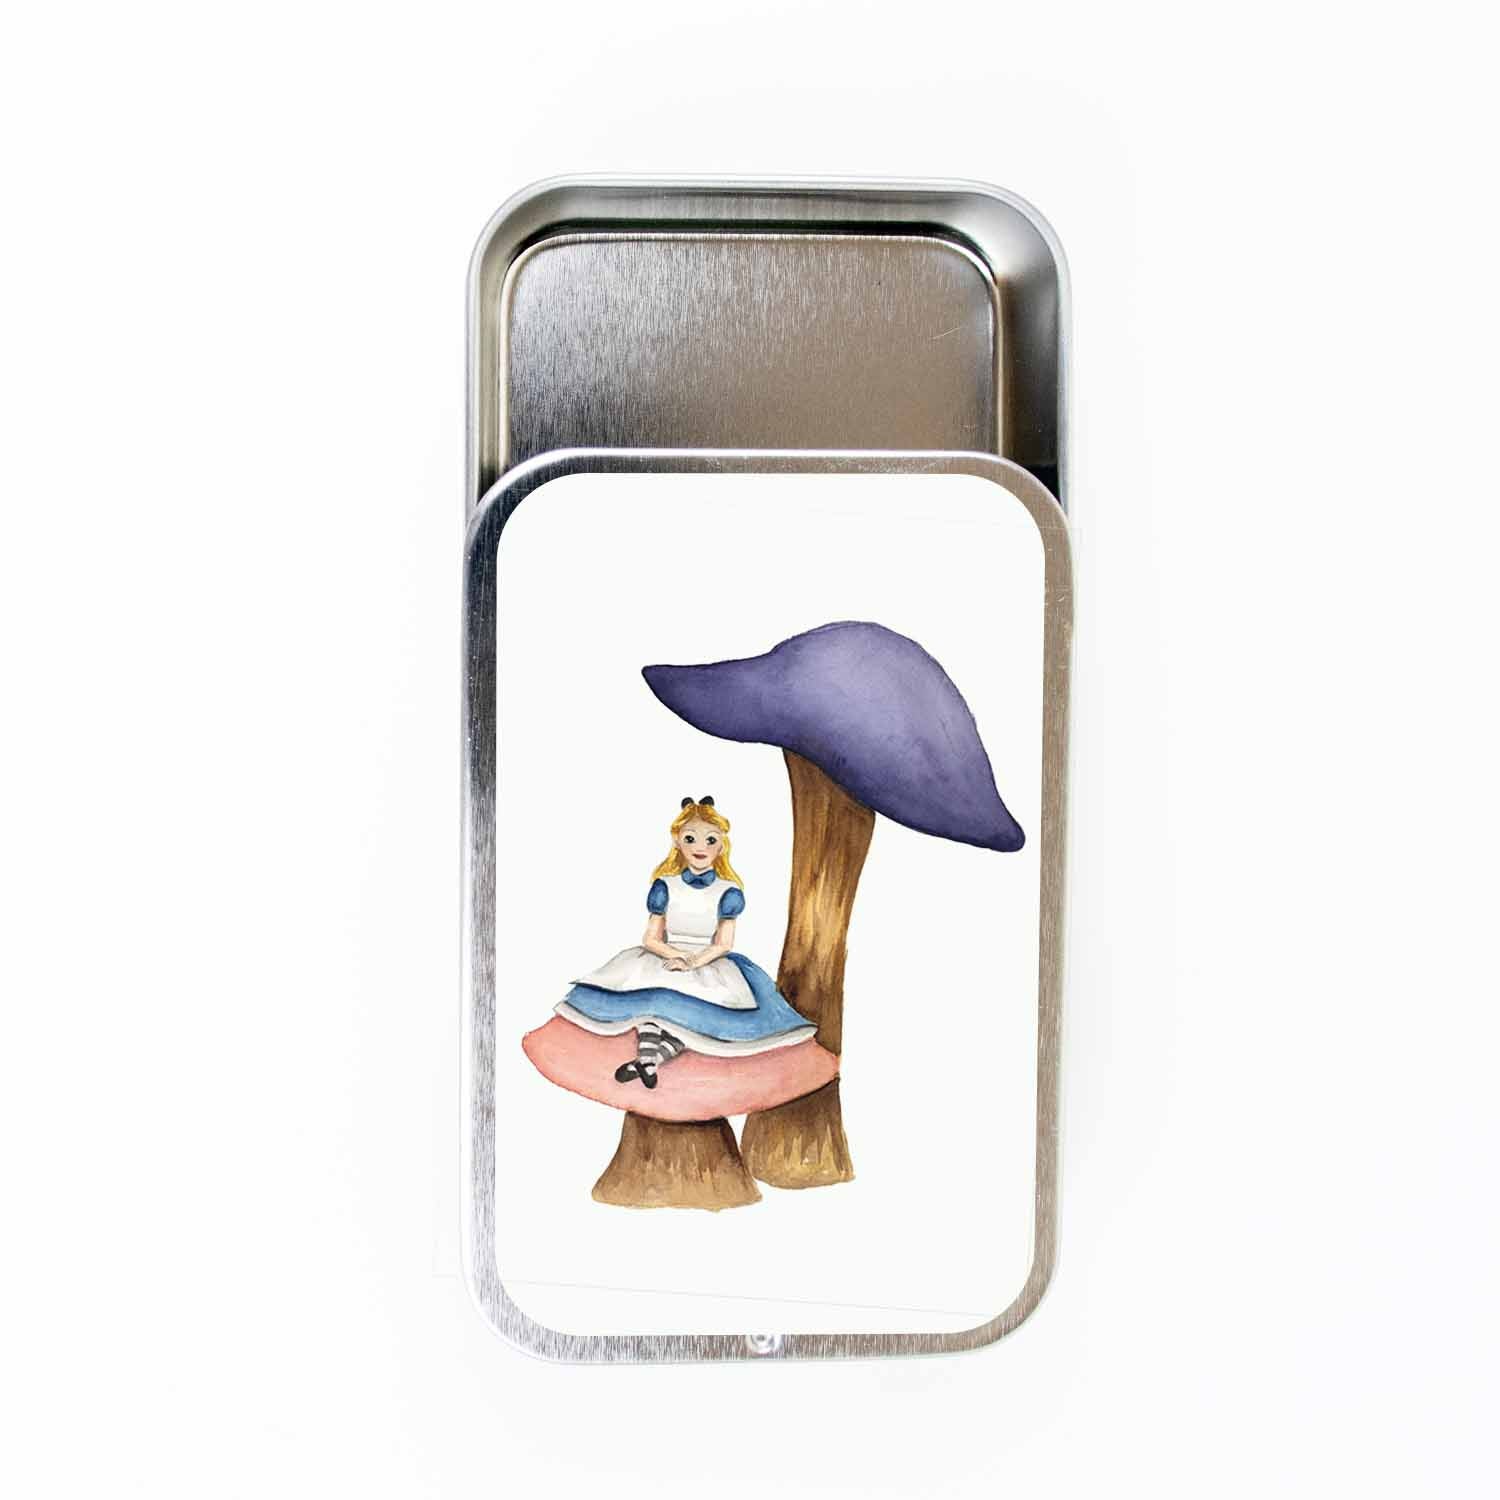 Alice in Wonderland Gifts Put a Topsy-Turvy Twist on Ordinary Presents